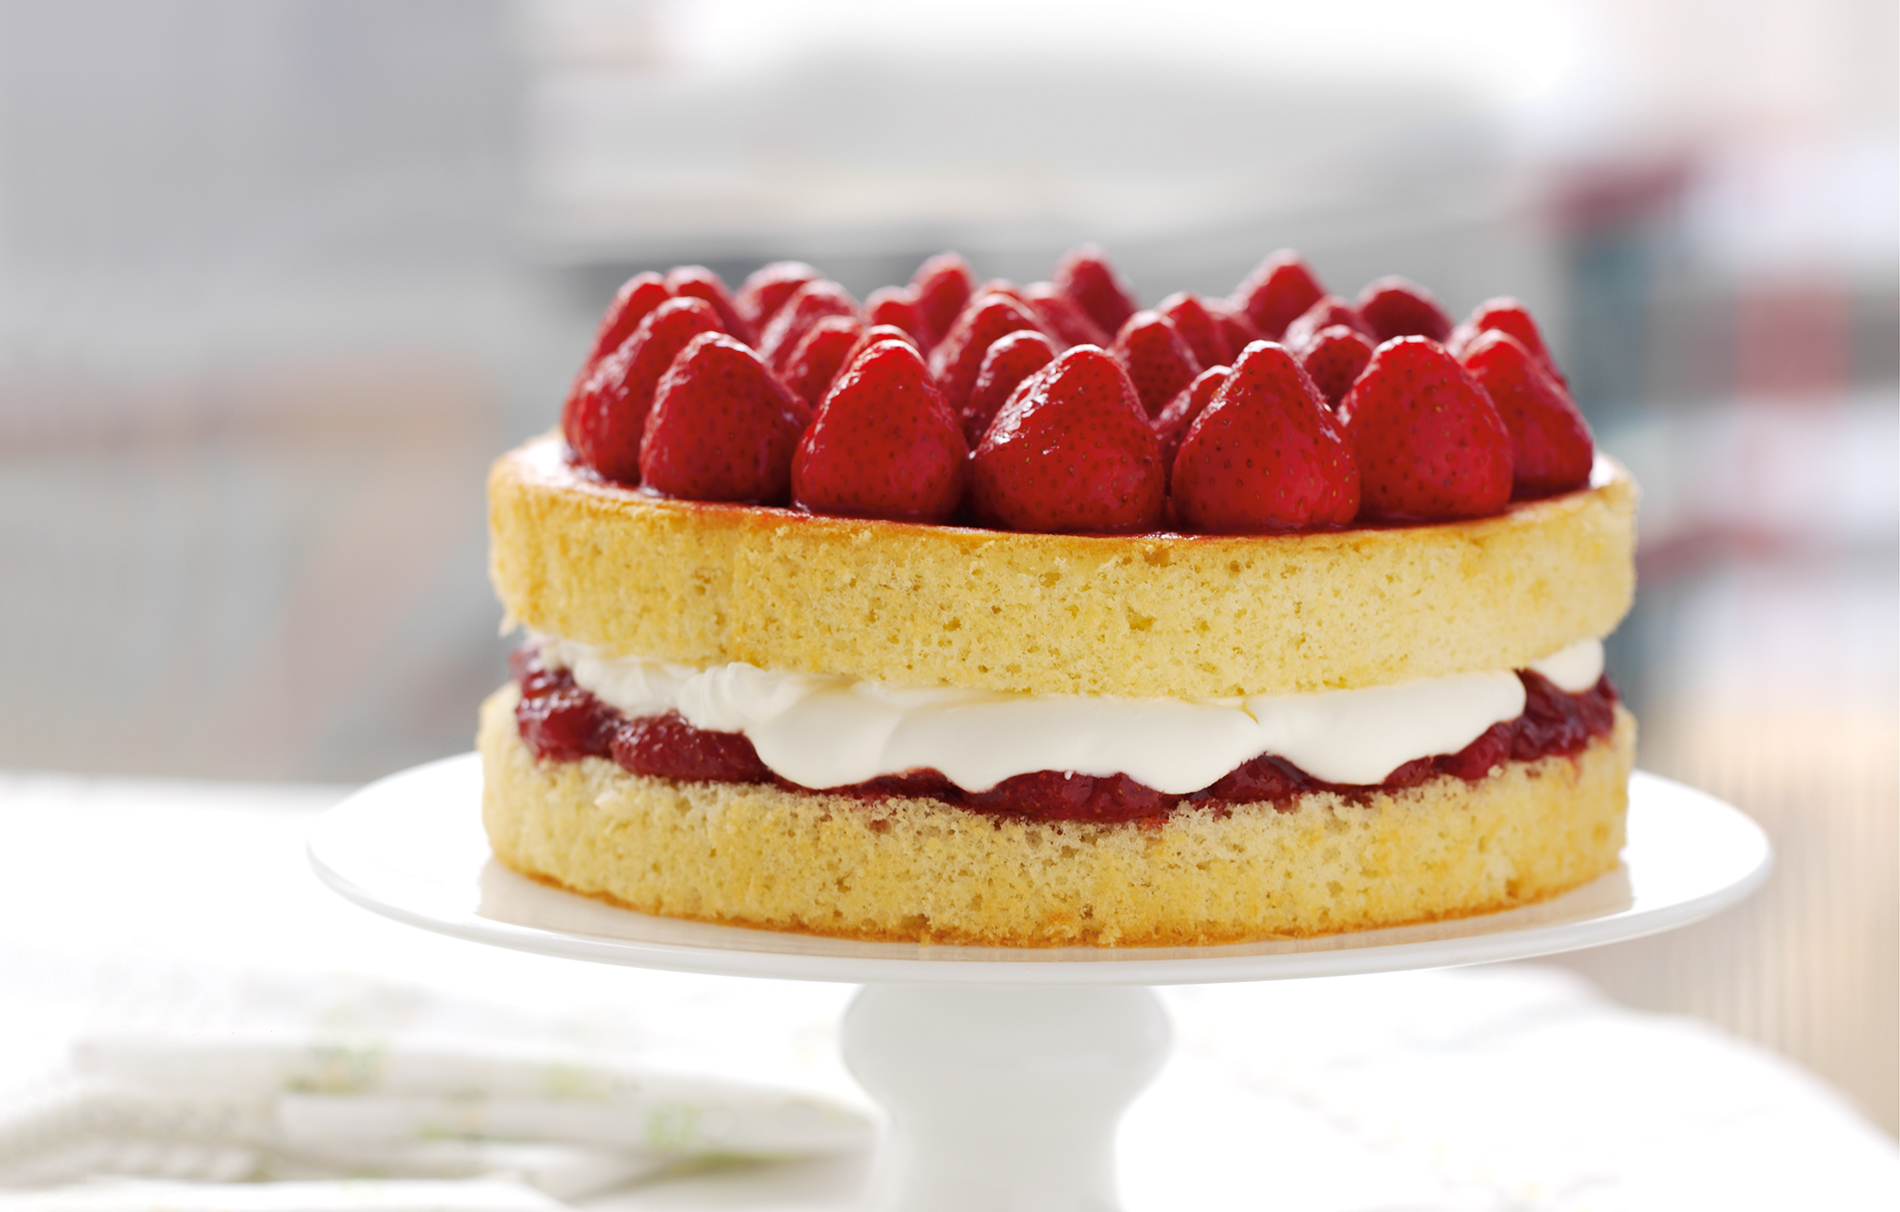 Simple genoise sponge cake recipe (Mary Berry's) - Feast and Farm